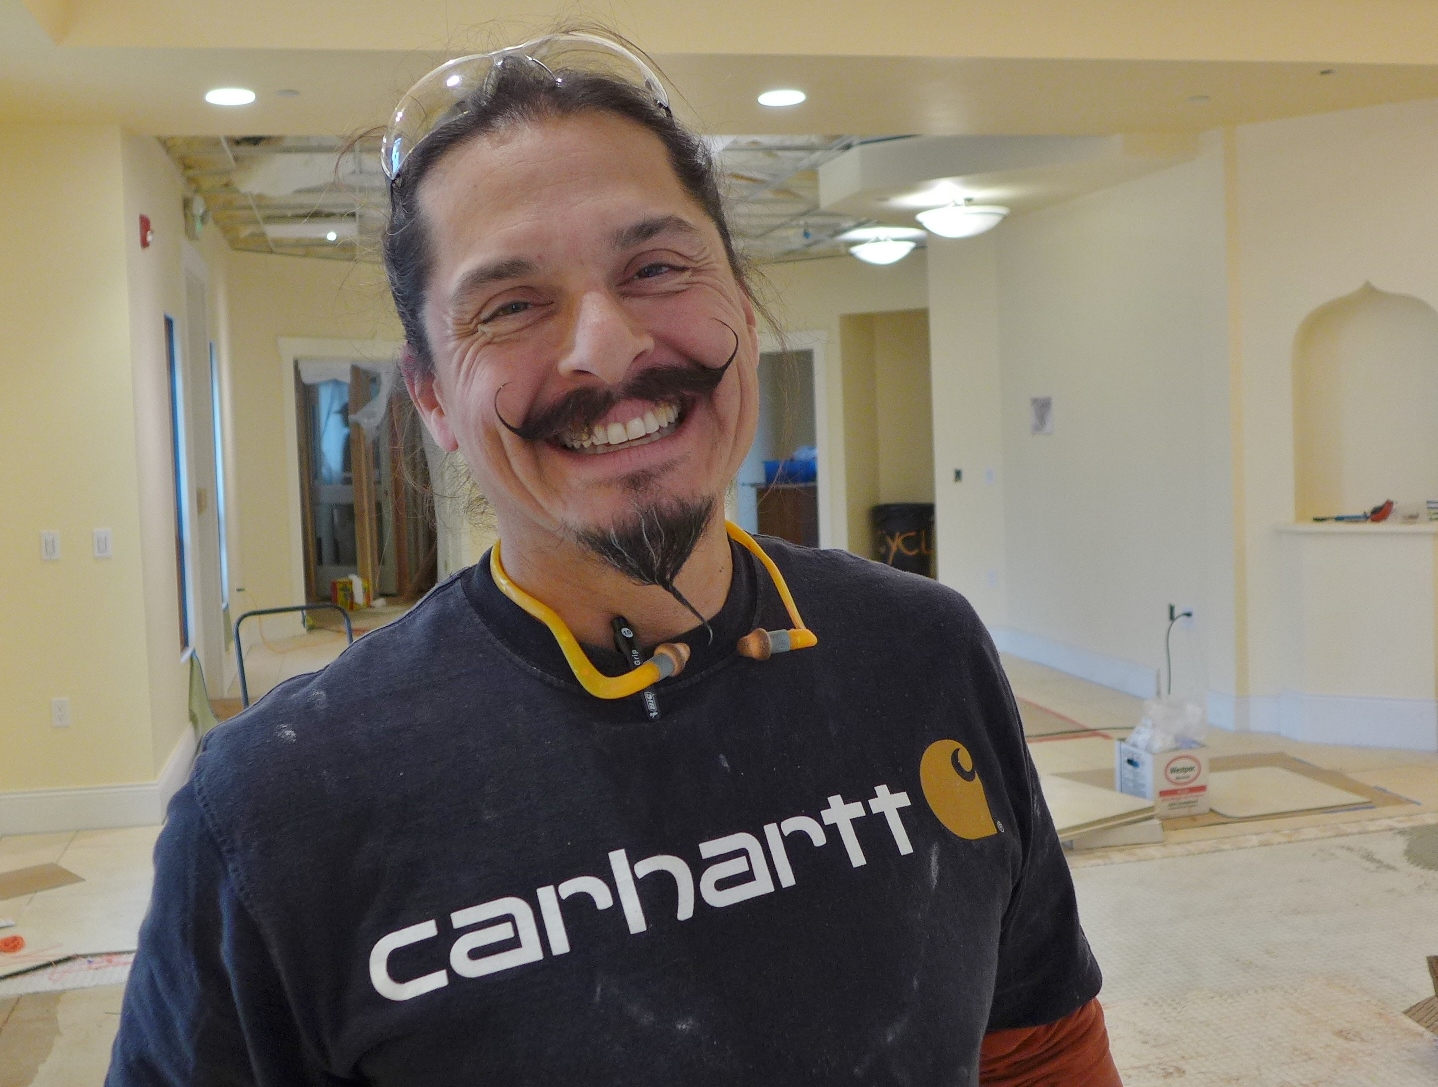 Pablo "Picasso", one of our intrepid tile craftsmen